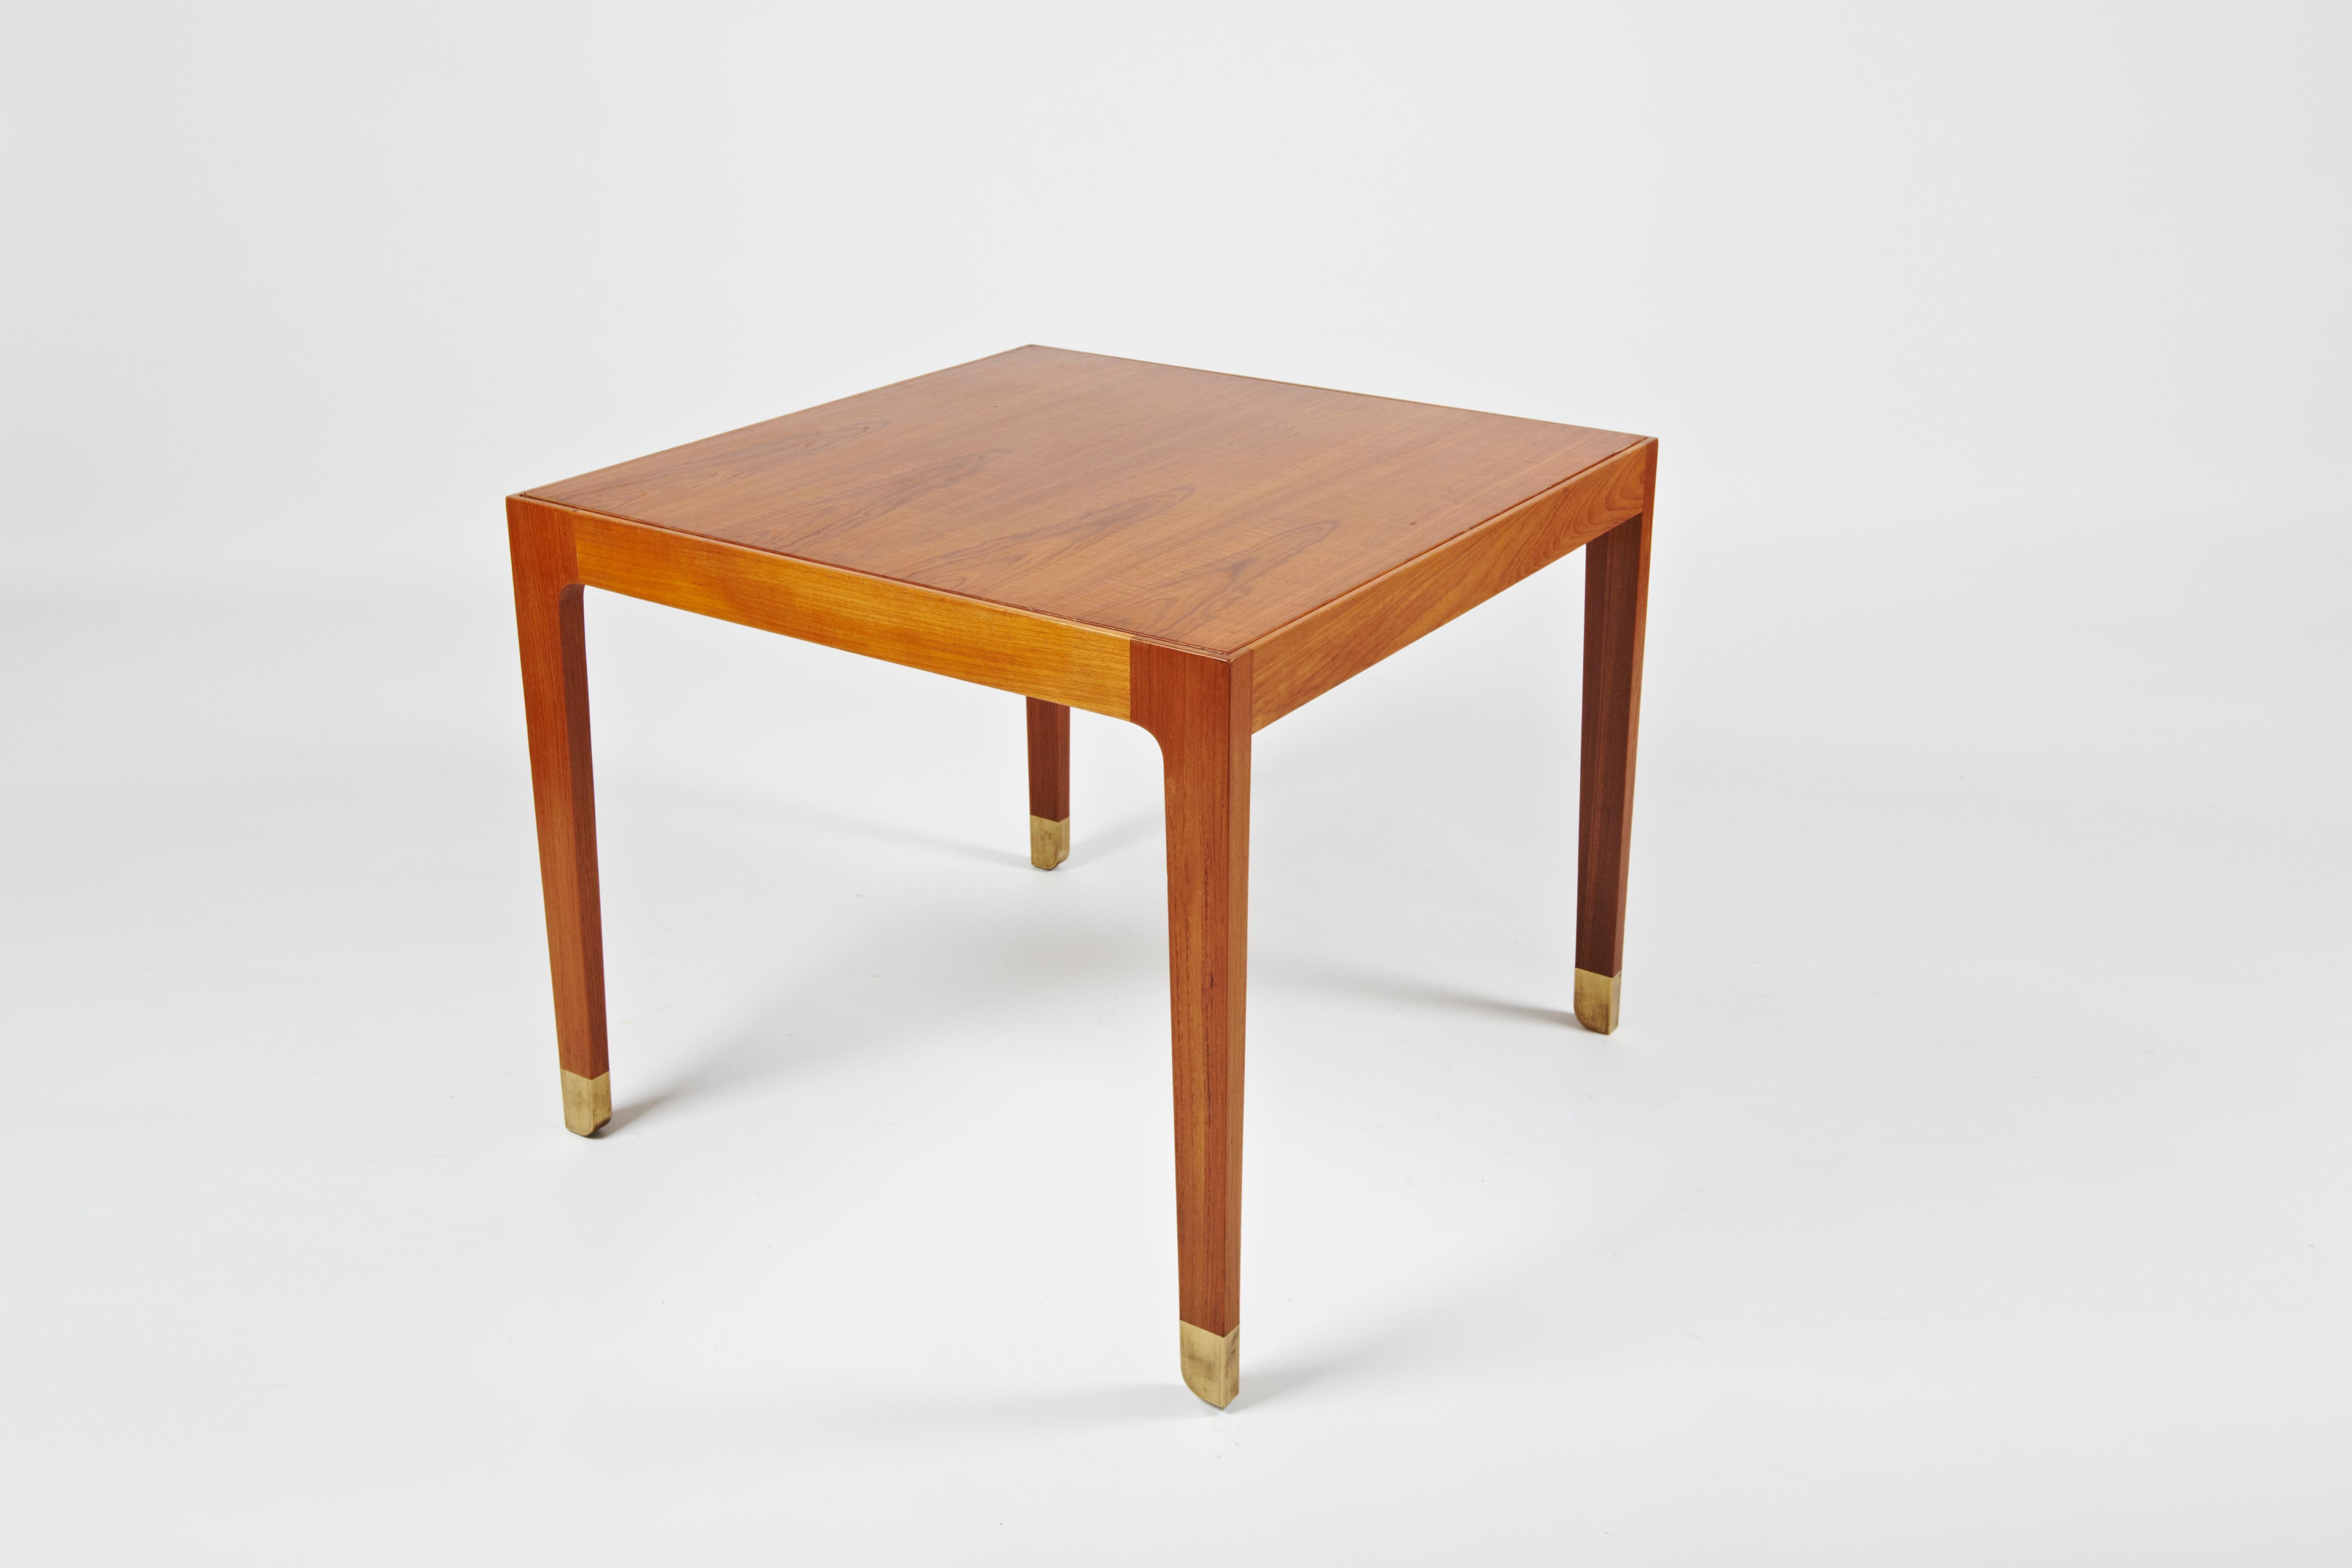 Finn Juhl:  Exhibition tables made 1947 - for dining or cards - single or pair For Sale 2